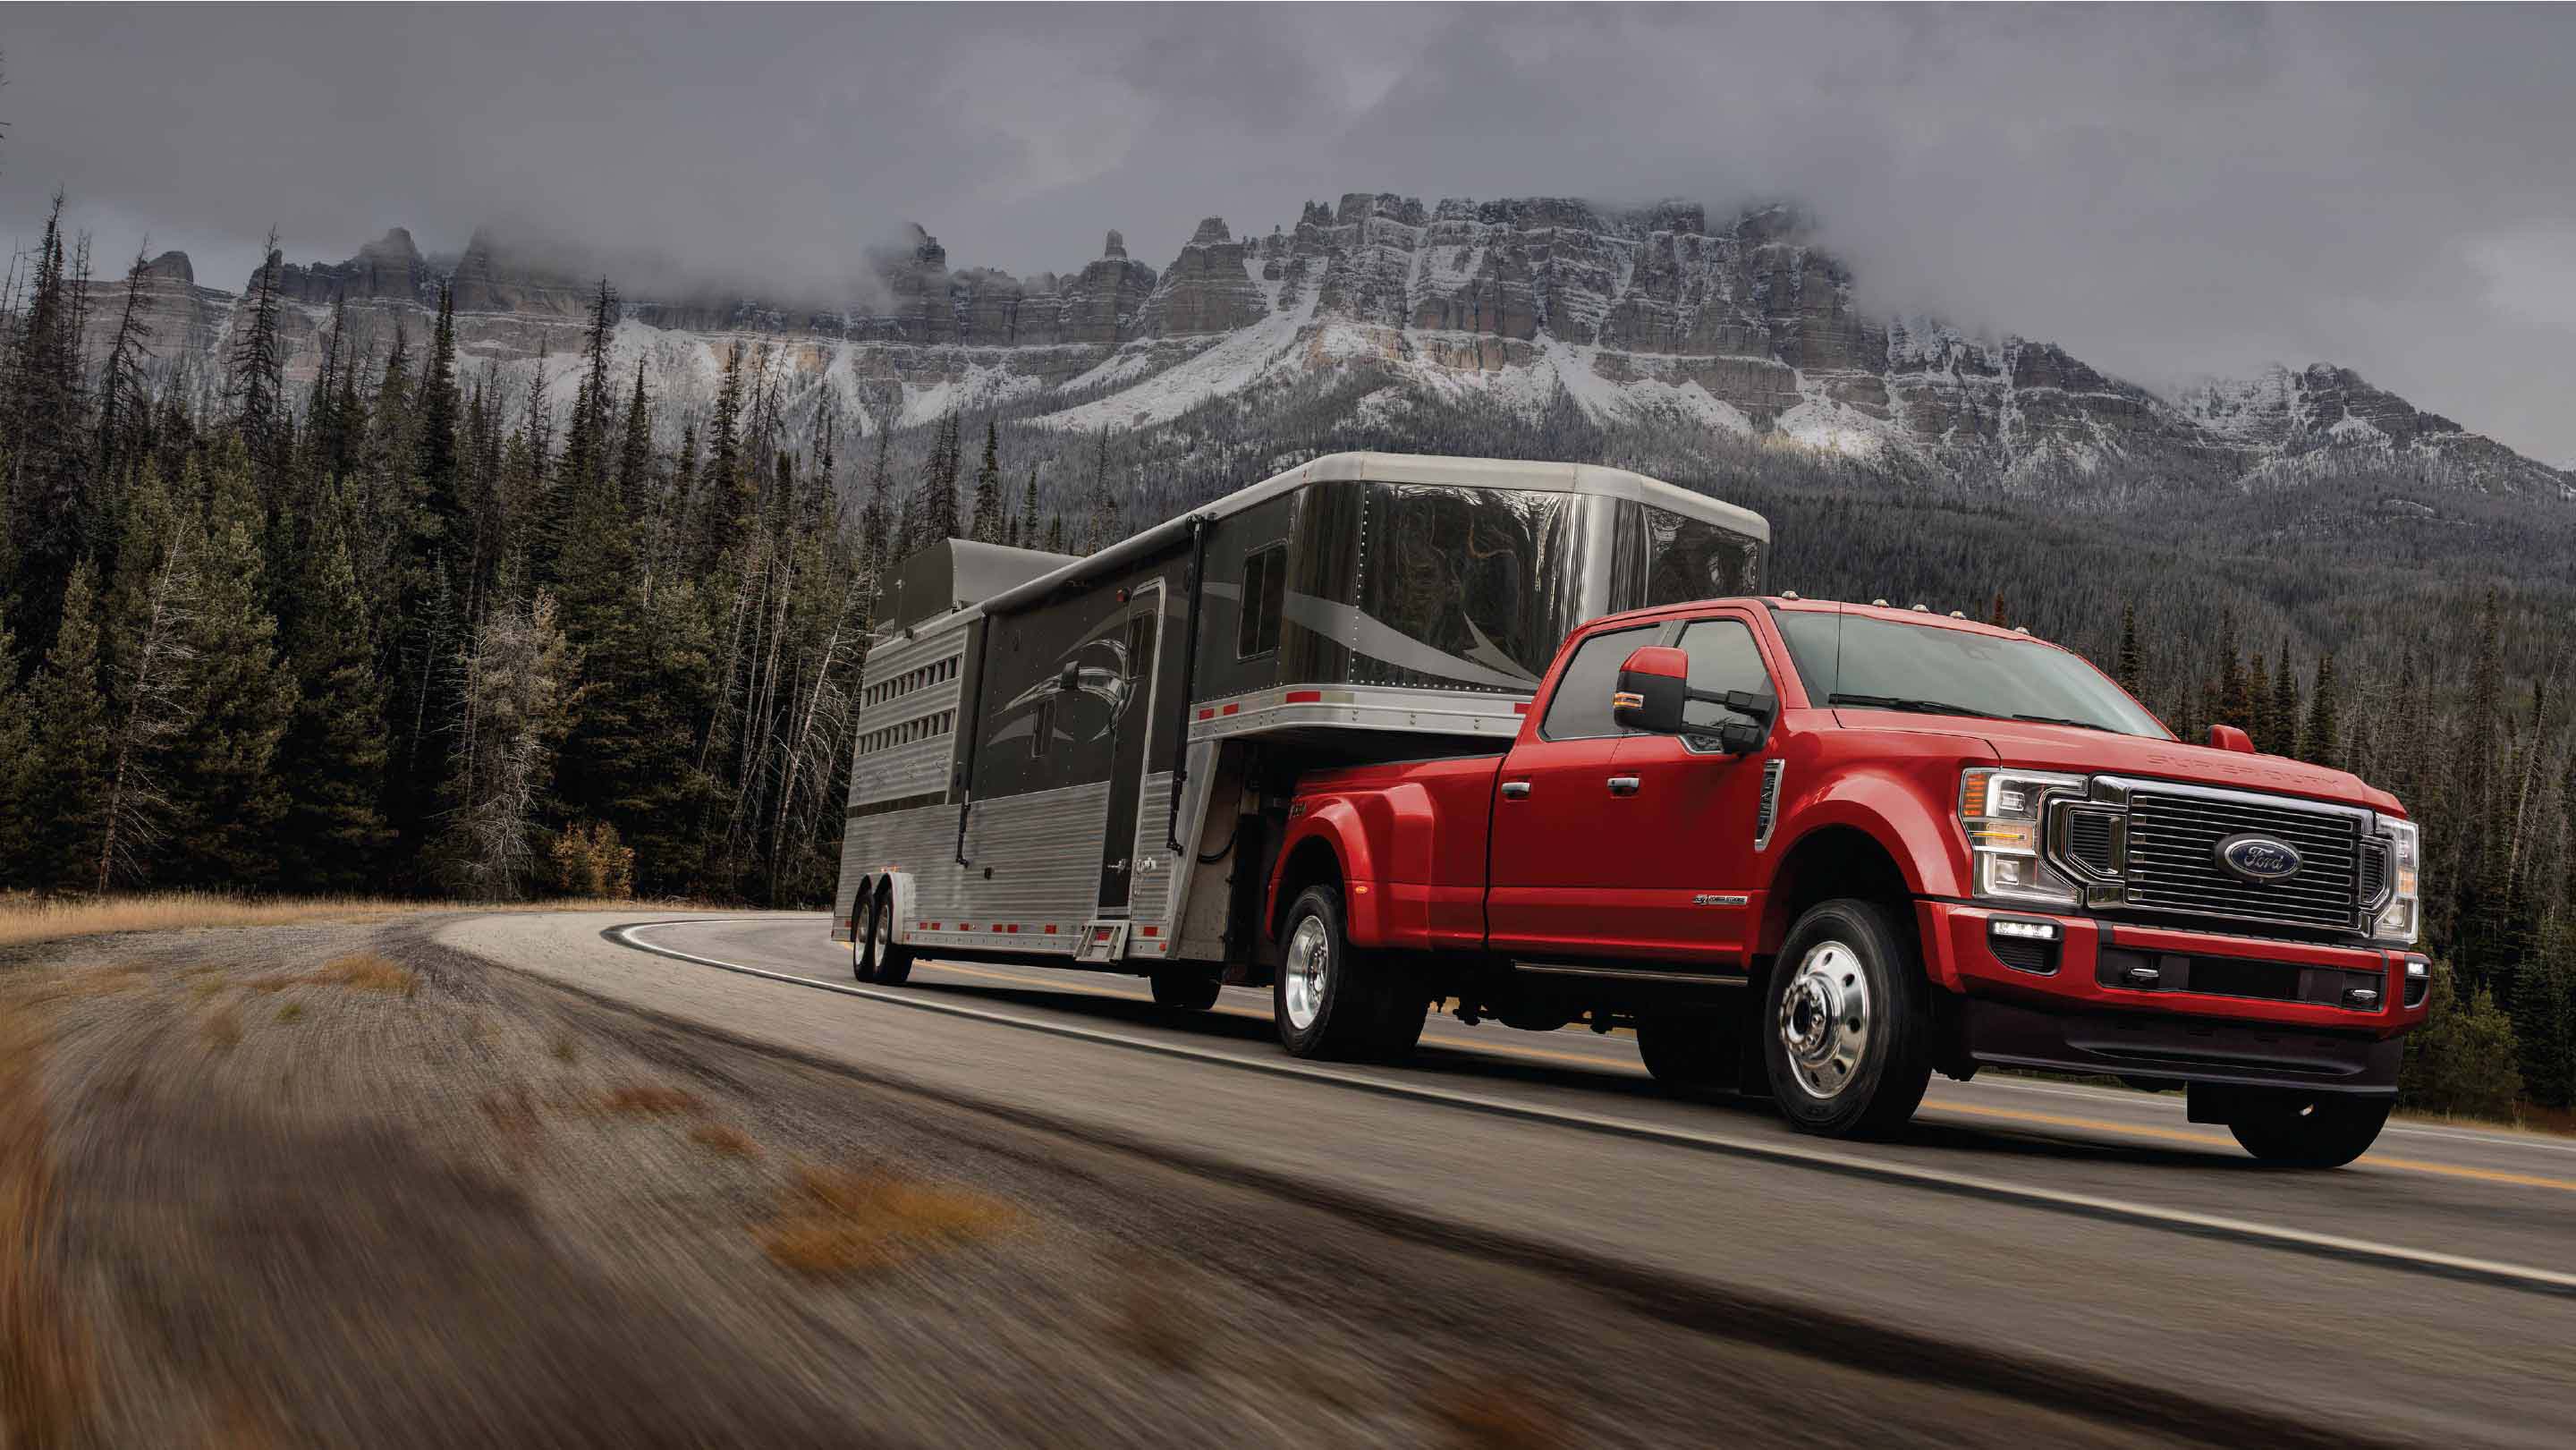 Red Ford pickup truck driving with connected trailer